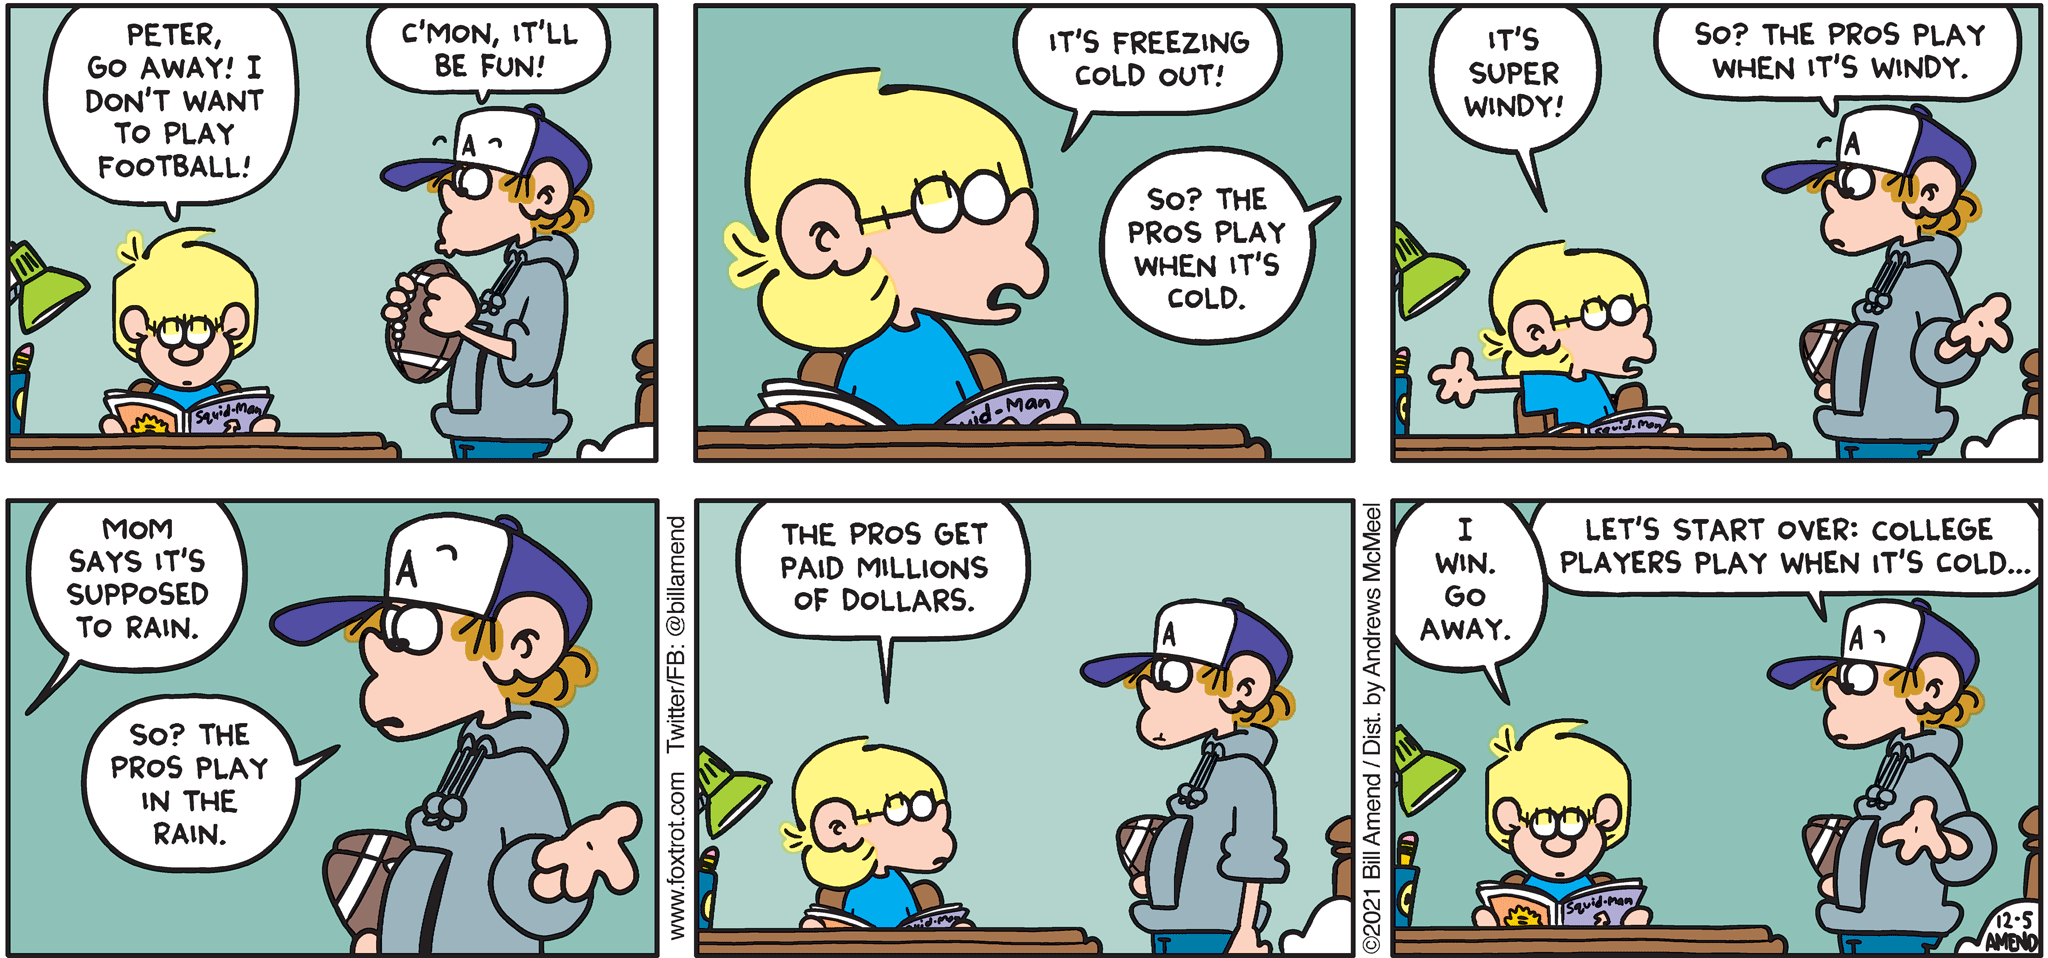 FoxTrot comic strip by Bill Amend - "NoPro" published December 5, 2021 - Transcript: Jason Fox: Peter, go away! I don't want to play football! Peter Fox: C'mon, it'll be fun! Jason Fox: It's freezing cold out! Peter Fox: So? That pros play when it's cold? Jason Fox: It's super wind! Peter Fox: So? The pros play when it's windy. Jason Fox: Mom says it's supposed to rain. Peter Fox: So? The pros play in the rain. Jason Fox: The pros get paid millions of dollars. I win. Go away. Peter Fox: Let's start over: College players play when it's cold...